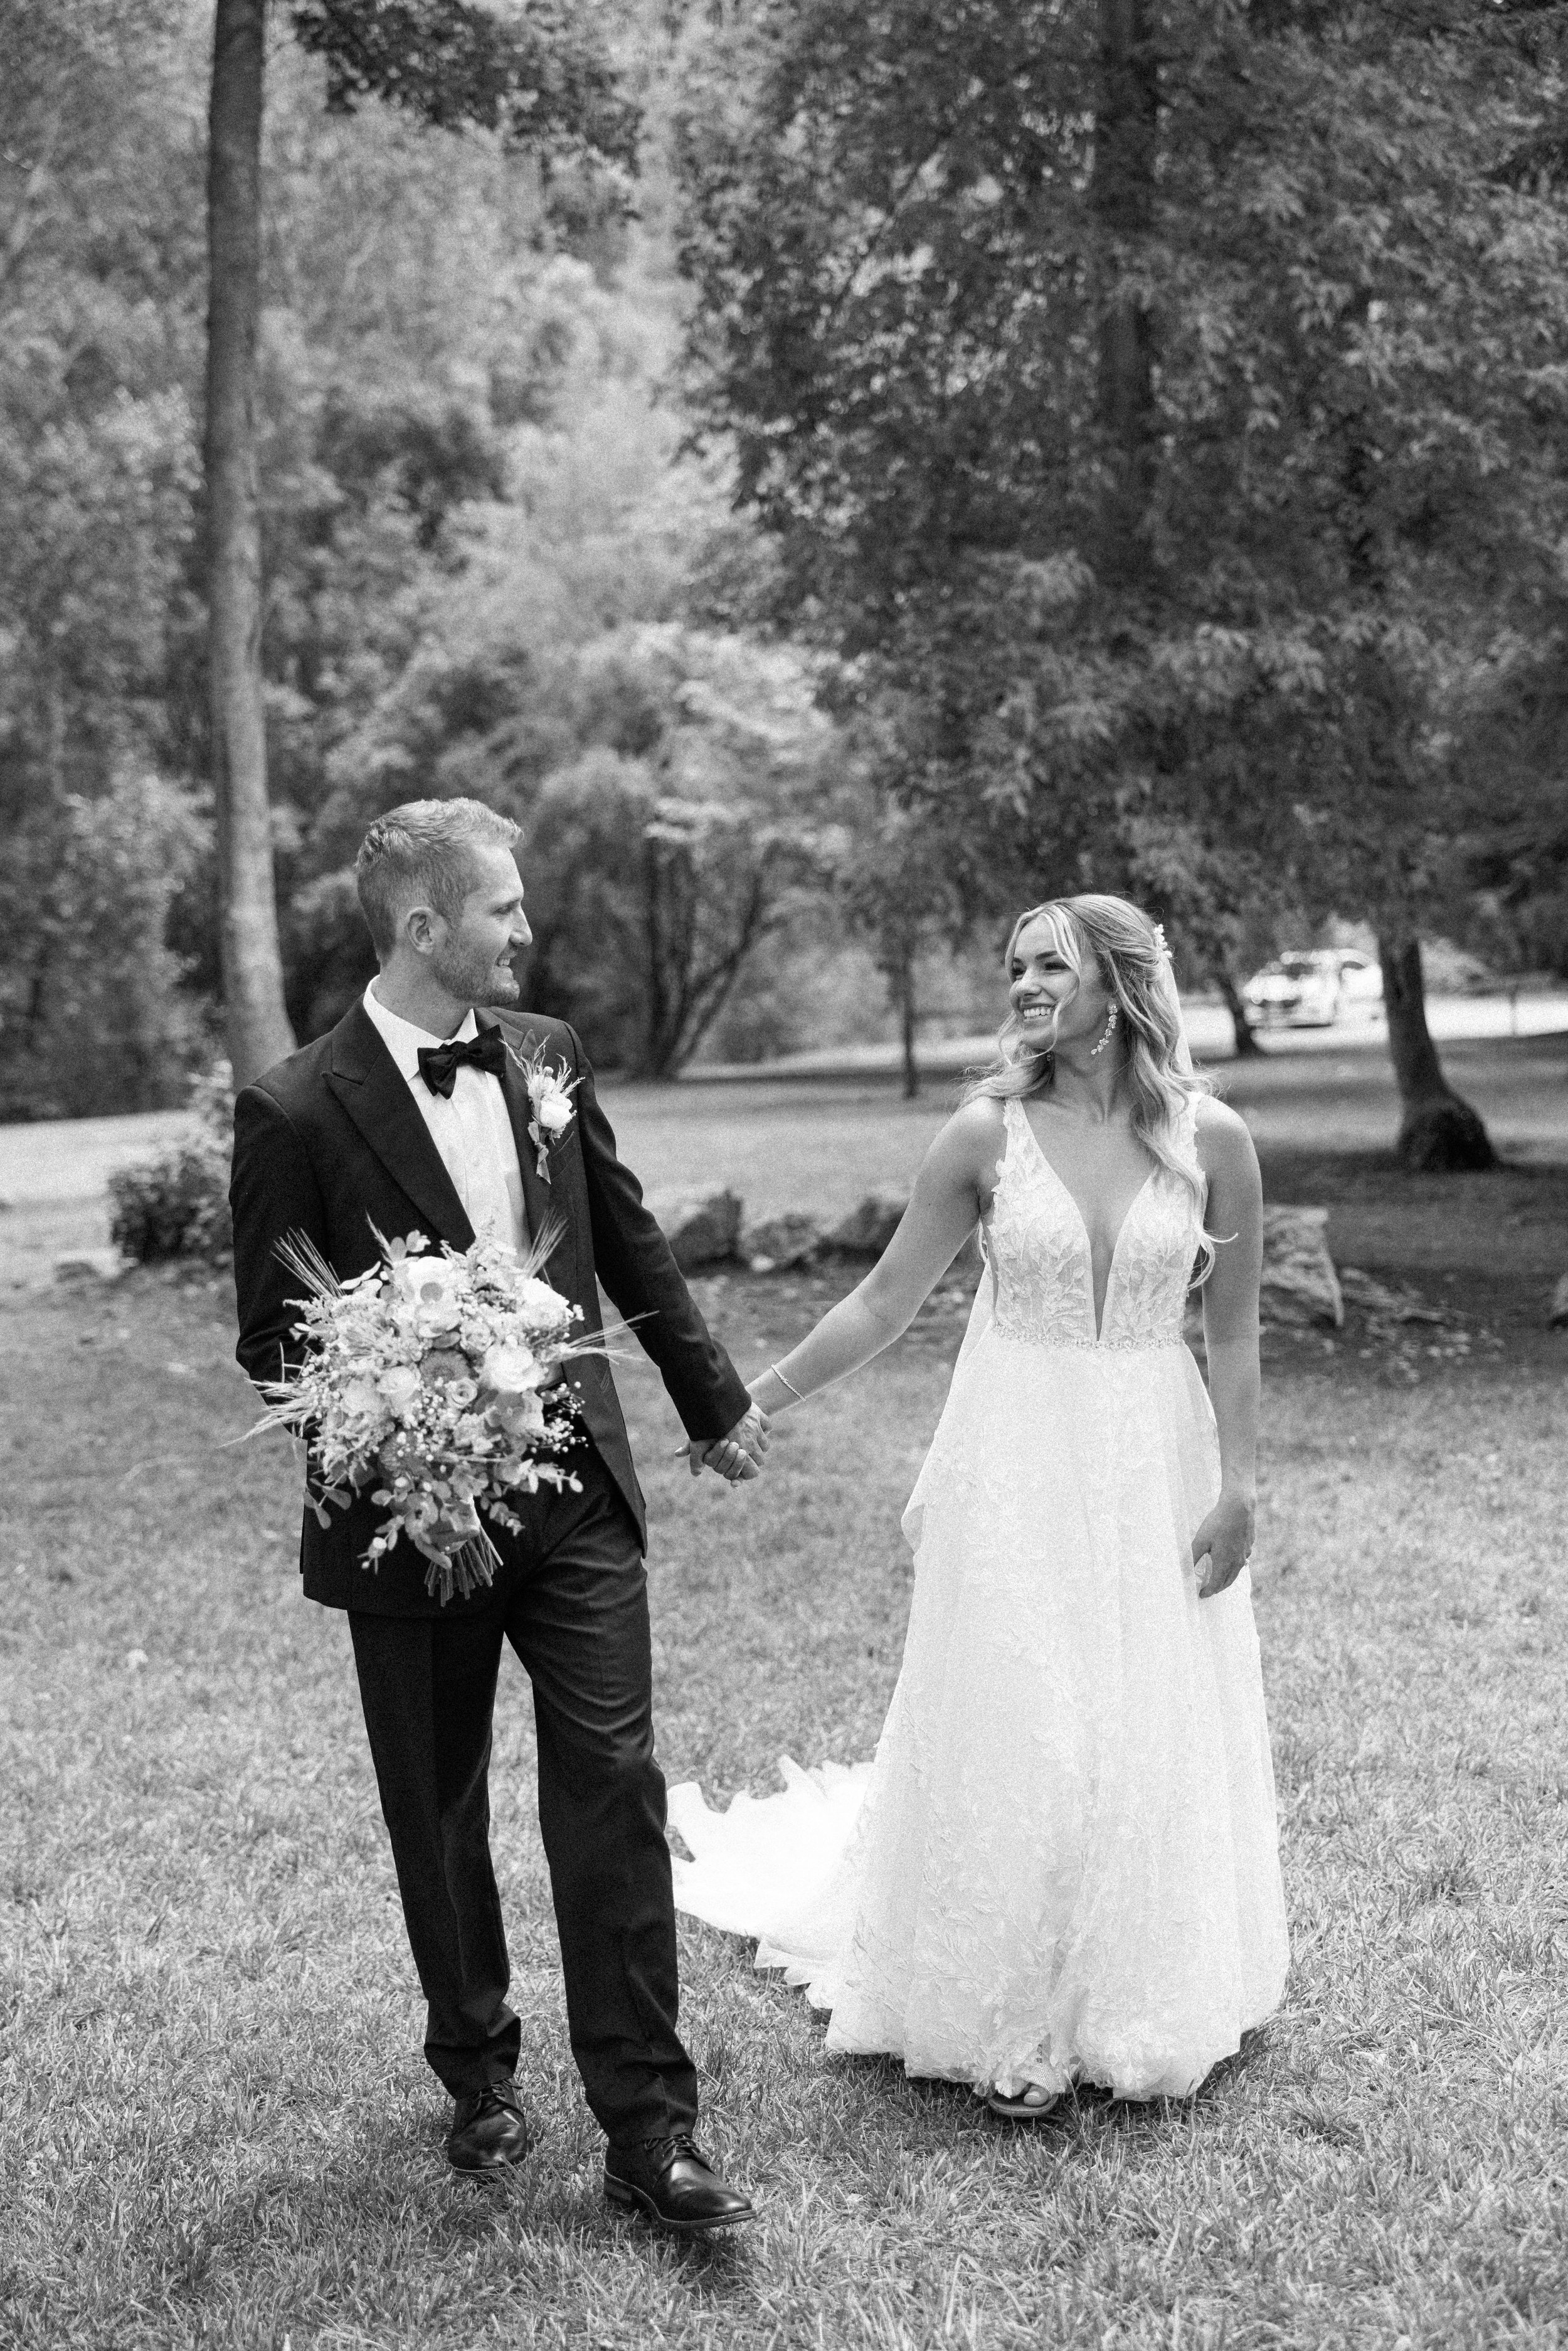  Savanna Richardson Photography captures a black and white portrait of a bride and groom holding hands in a meadow. black and white bridals #SavannaRichardsonPhotography #SavannaRichardsonWeddings #QuietMeadowFarms #MapletonUTweddingphotographers 